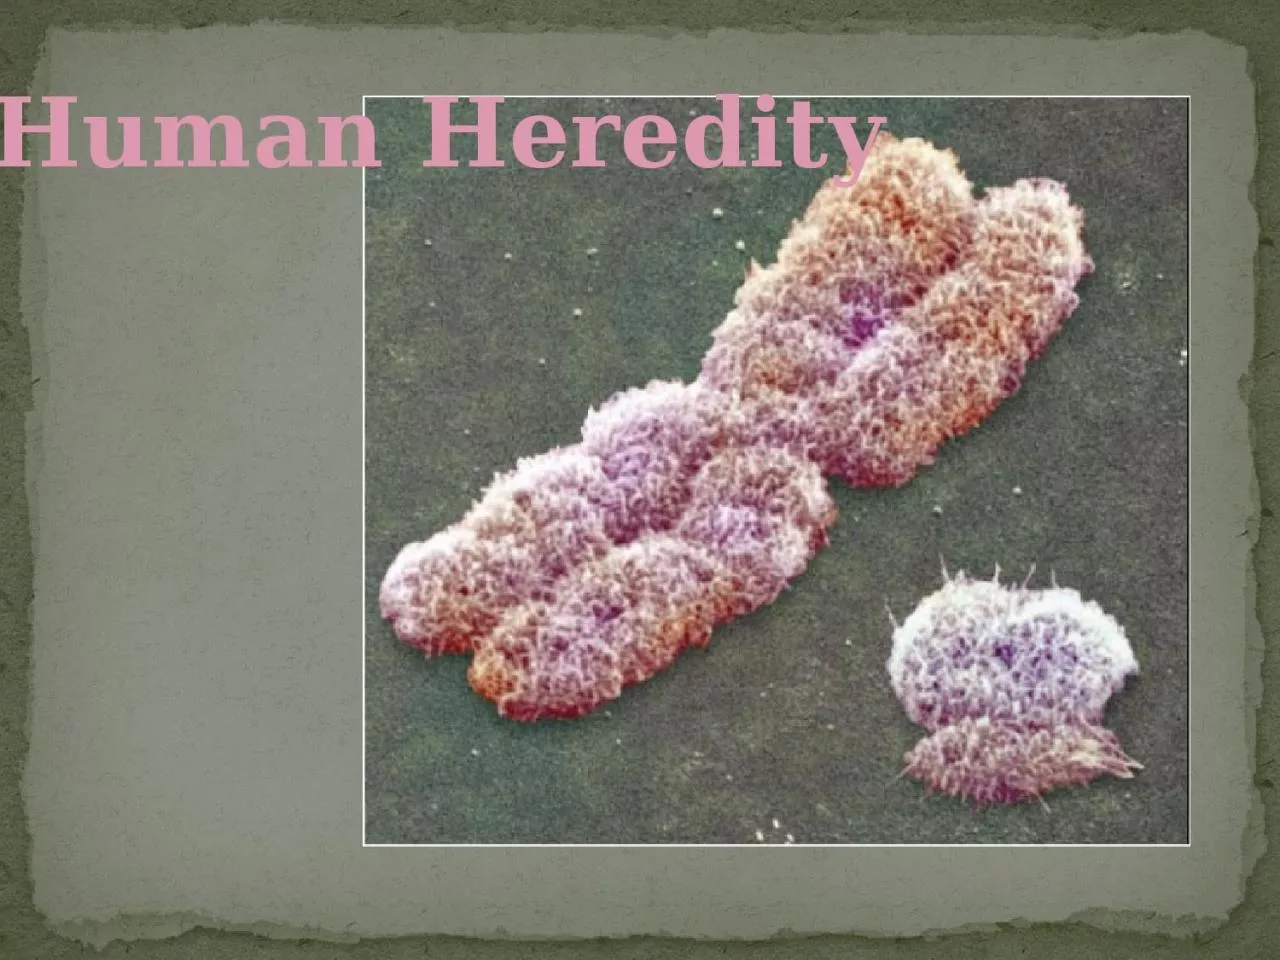 Human Heredity Walter Sutton in 1902 proposed that chromosomes were the physical carriers